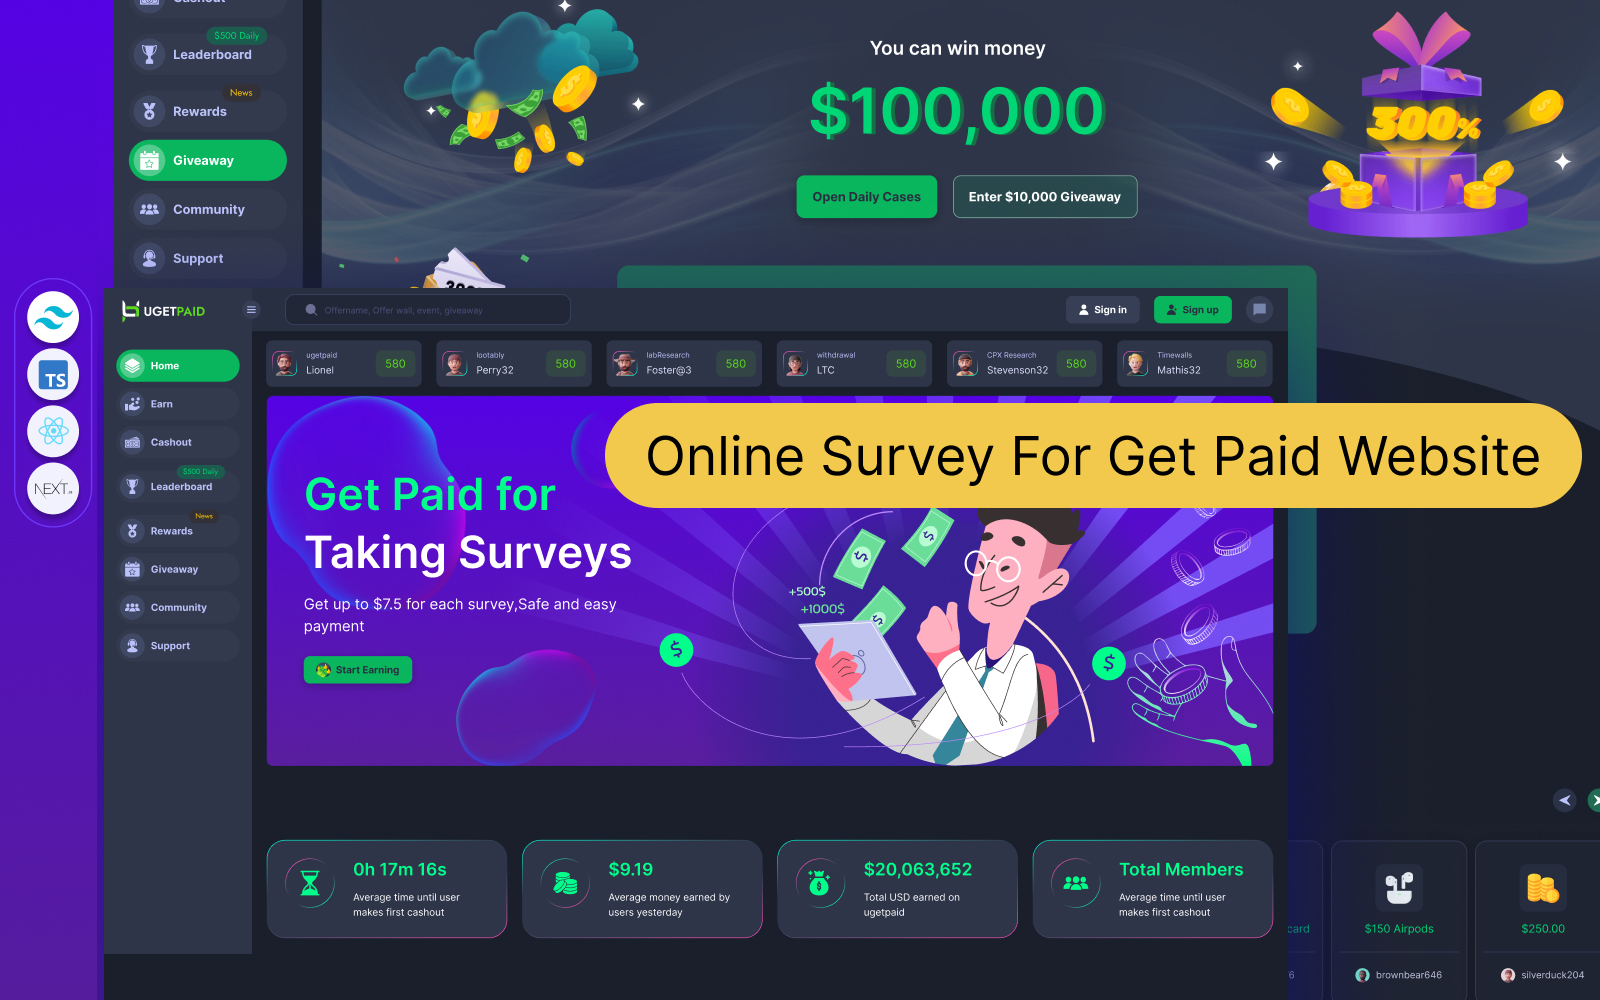 Ugetpaid - Online Survey For Get Paid Website React Next JS Template Games & Nightlife